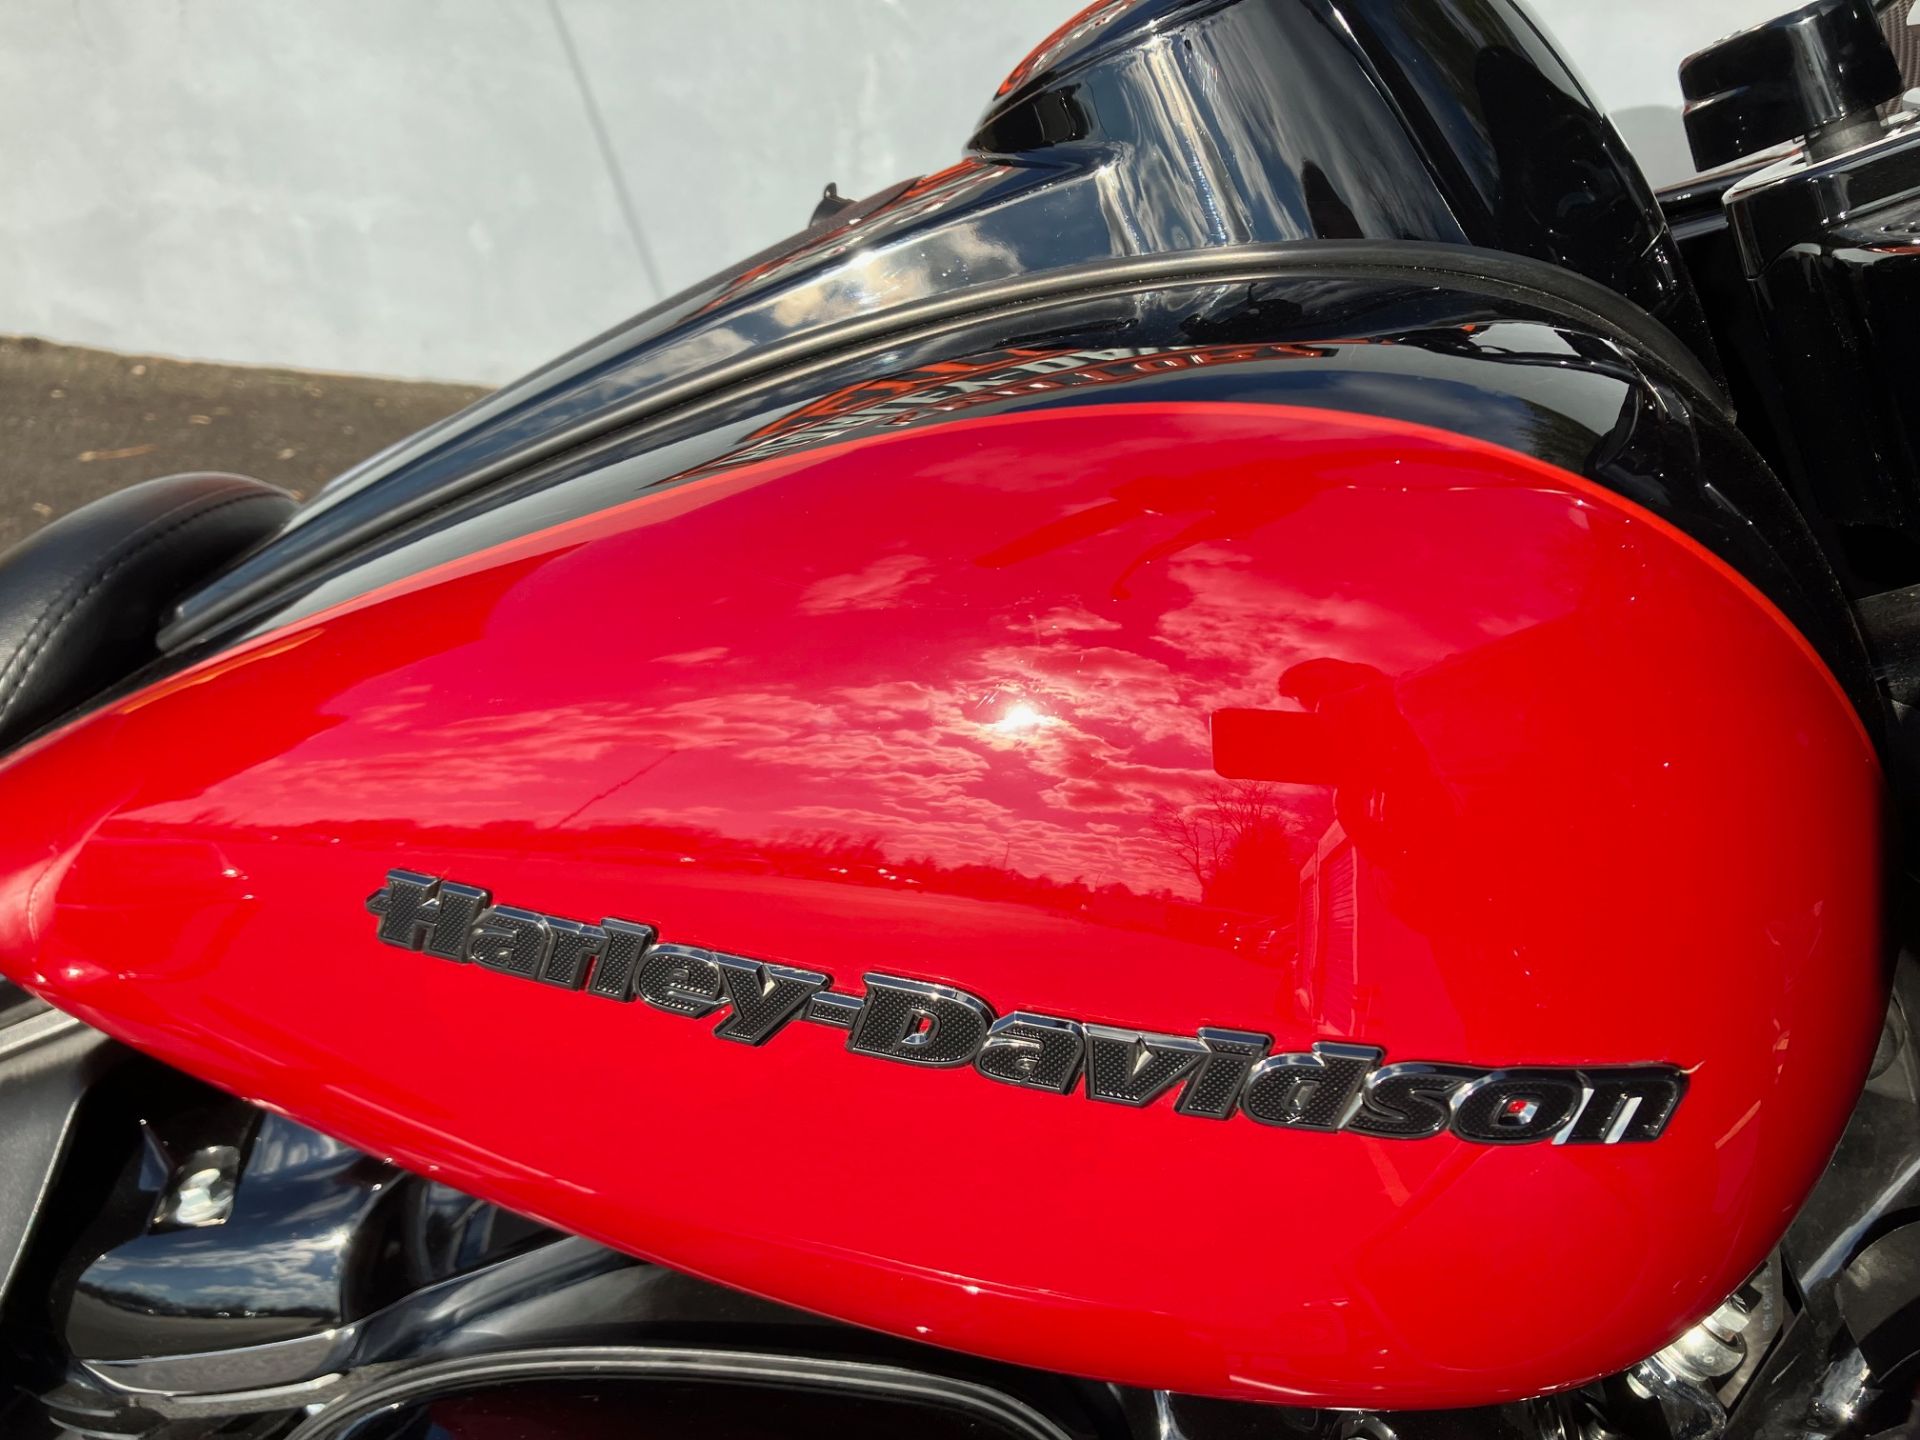 2020 Harley-Davidson ROAD GLIDE LIMITED in West Long Branch, New Jersey - Photo 9